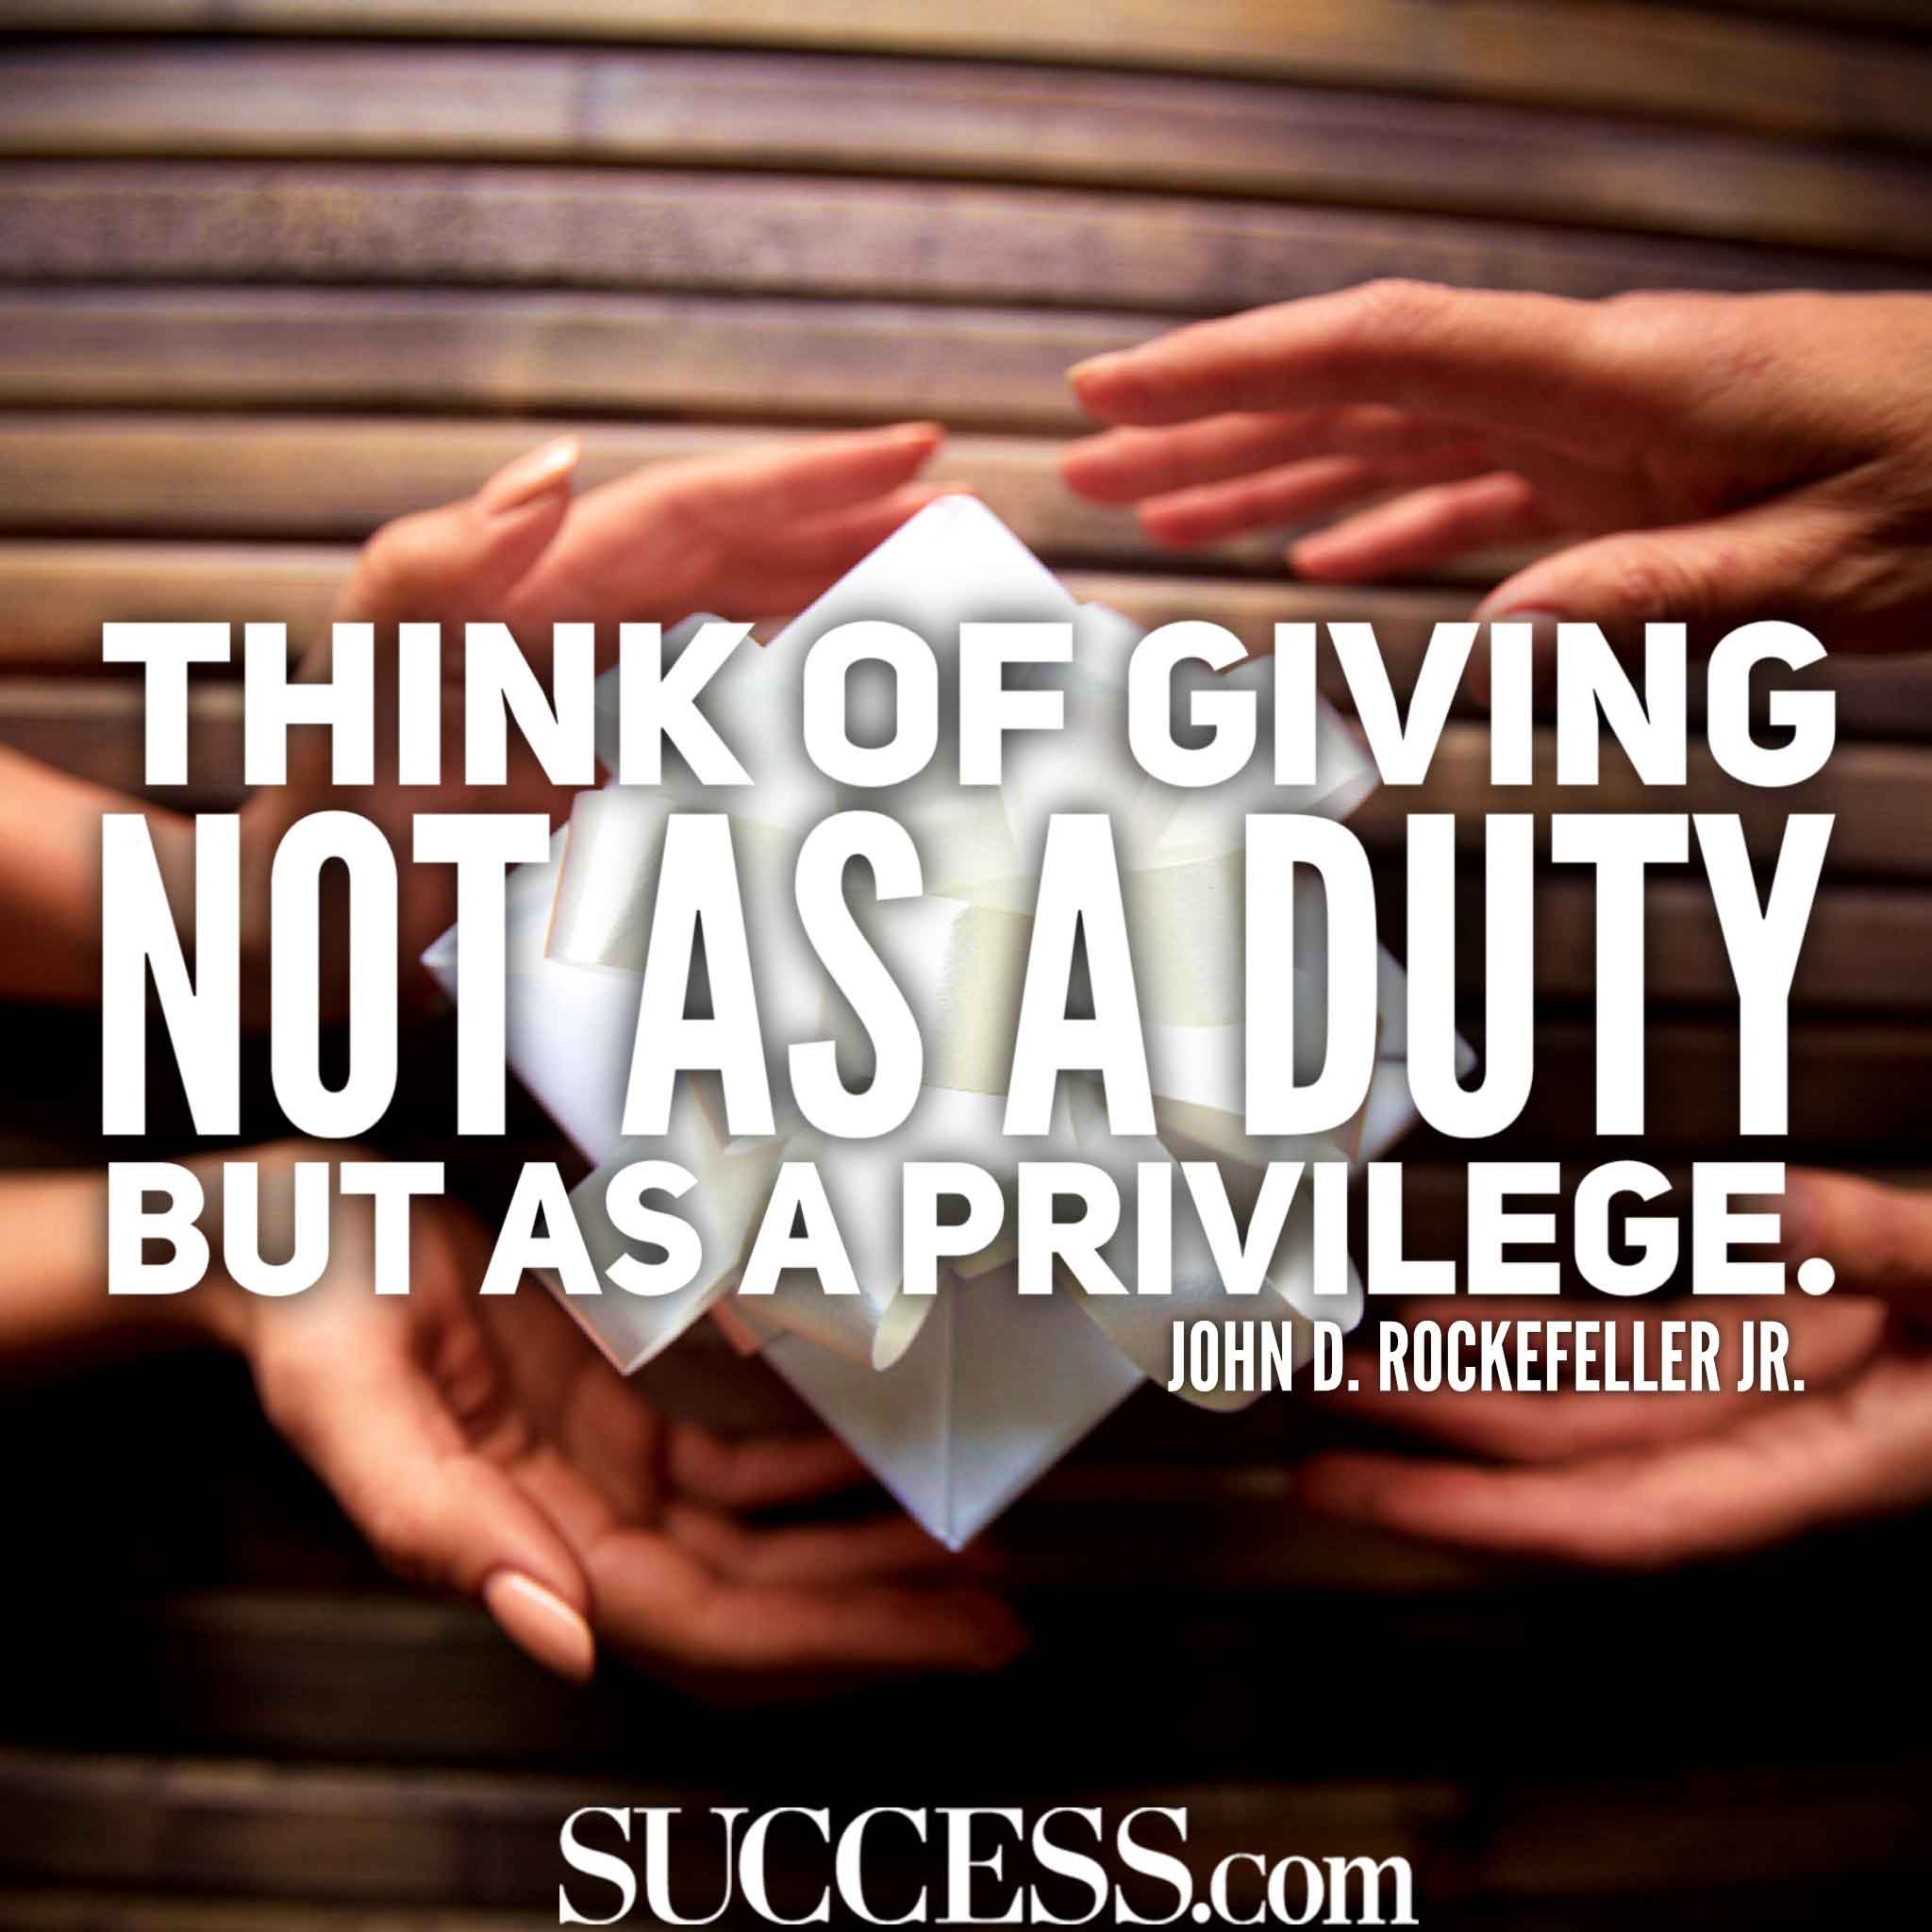 15 Inspiring Quotes About Giving SUCCESS